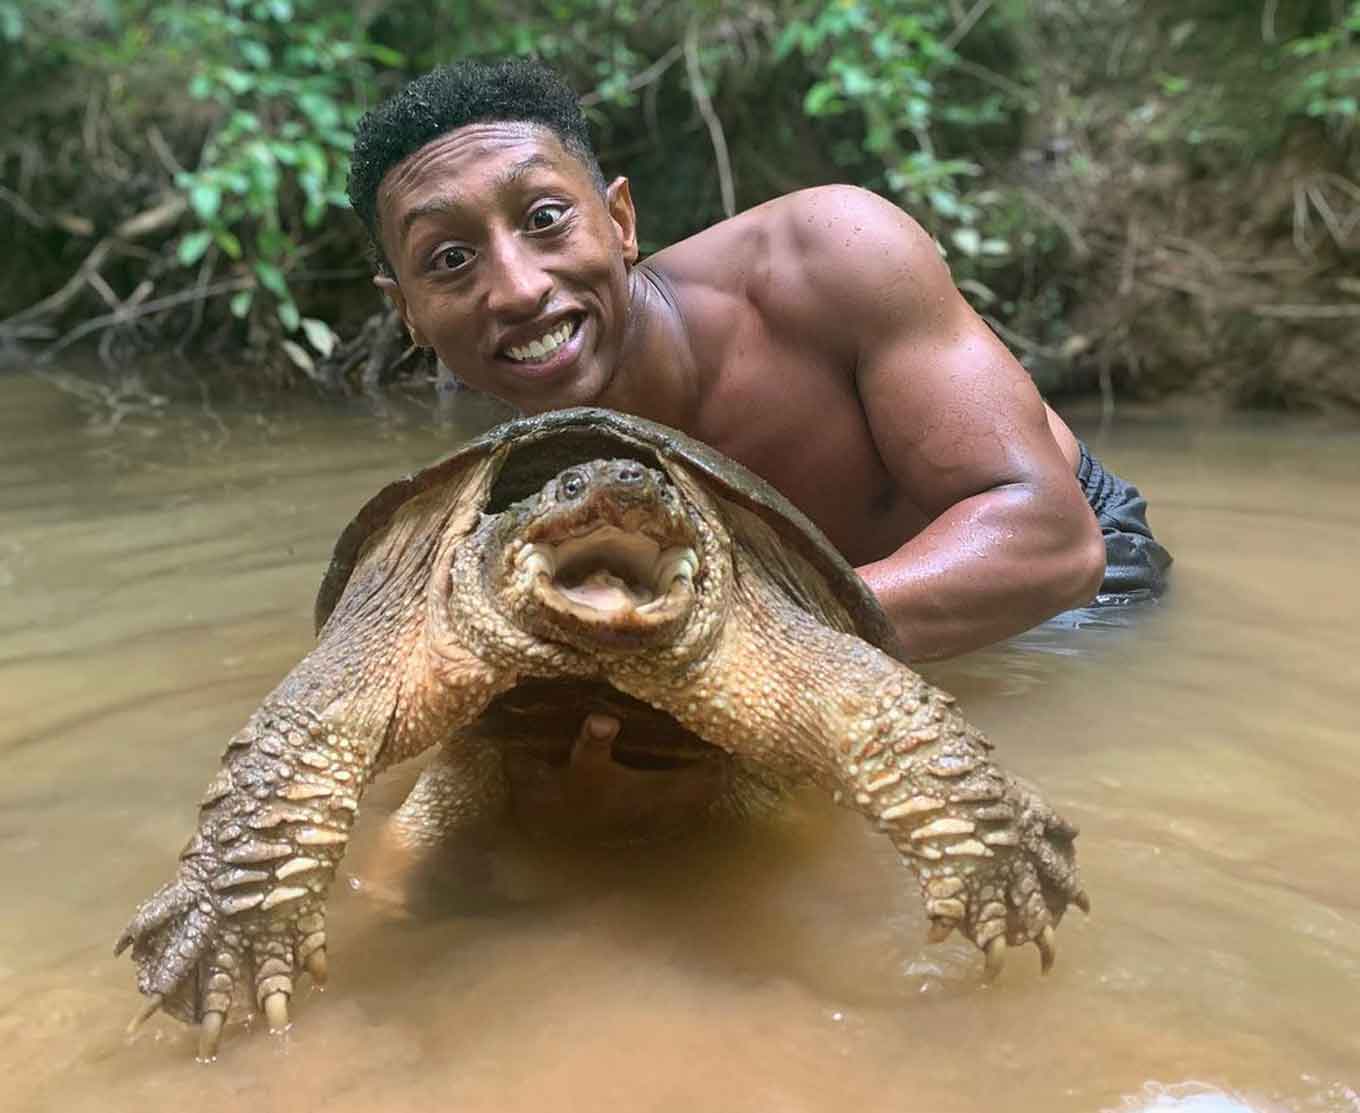 Christian Cave holding a Common Snapping Turtle in the water